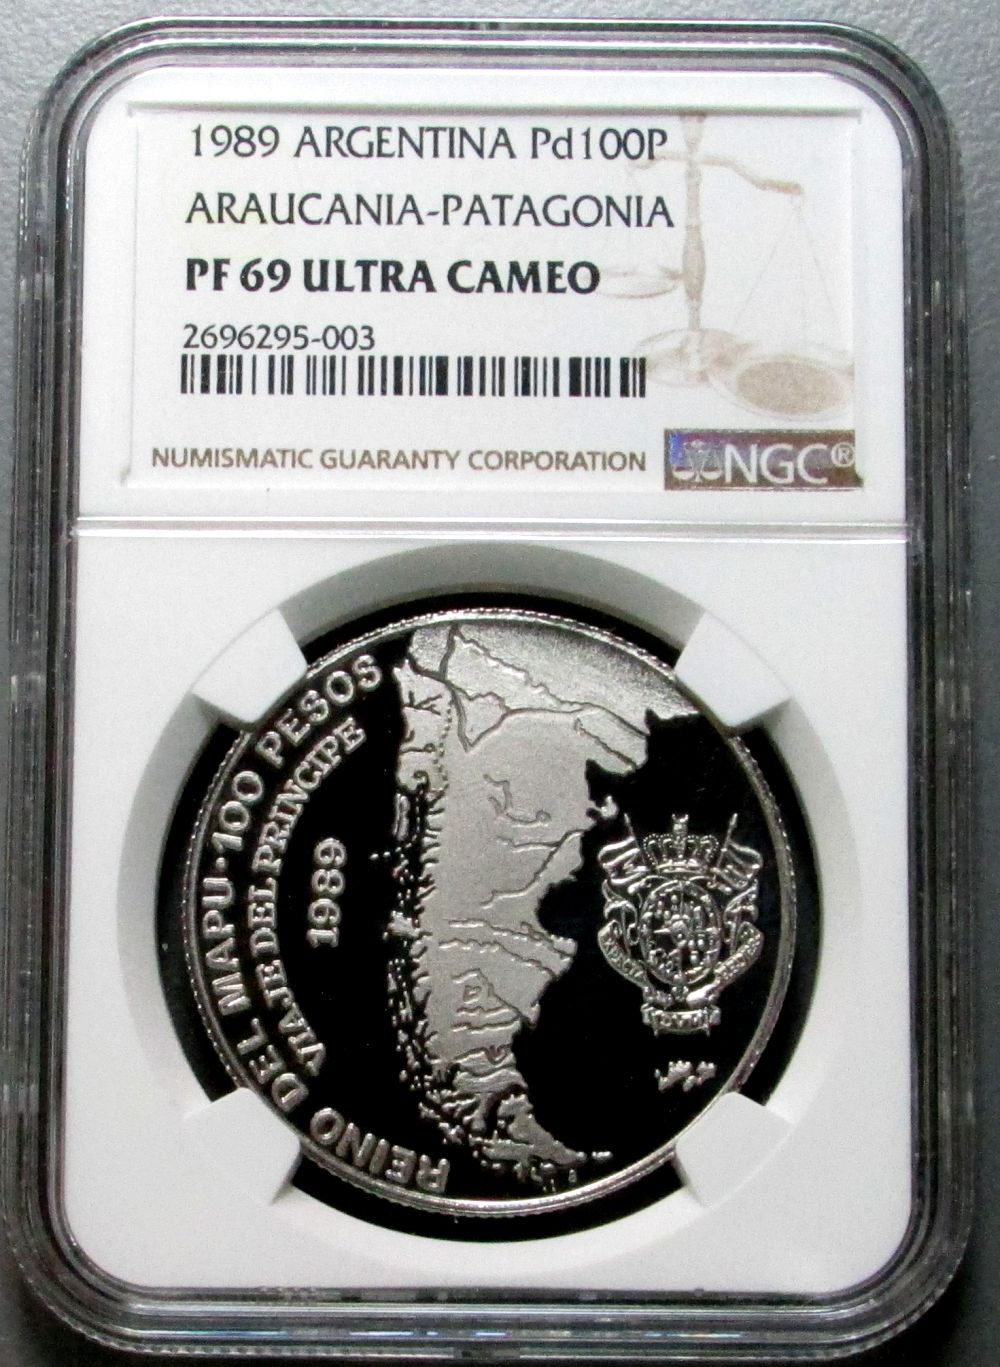 1989 PALLADIUM ARGENTINA 100 PESOS NGC PROOF 69 ULTRA CAMEO ARAUCANIA-PATAGONIA ONLY 10 MINTED "ONLY COIN CERTIFIED"